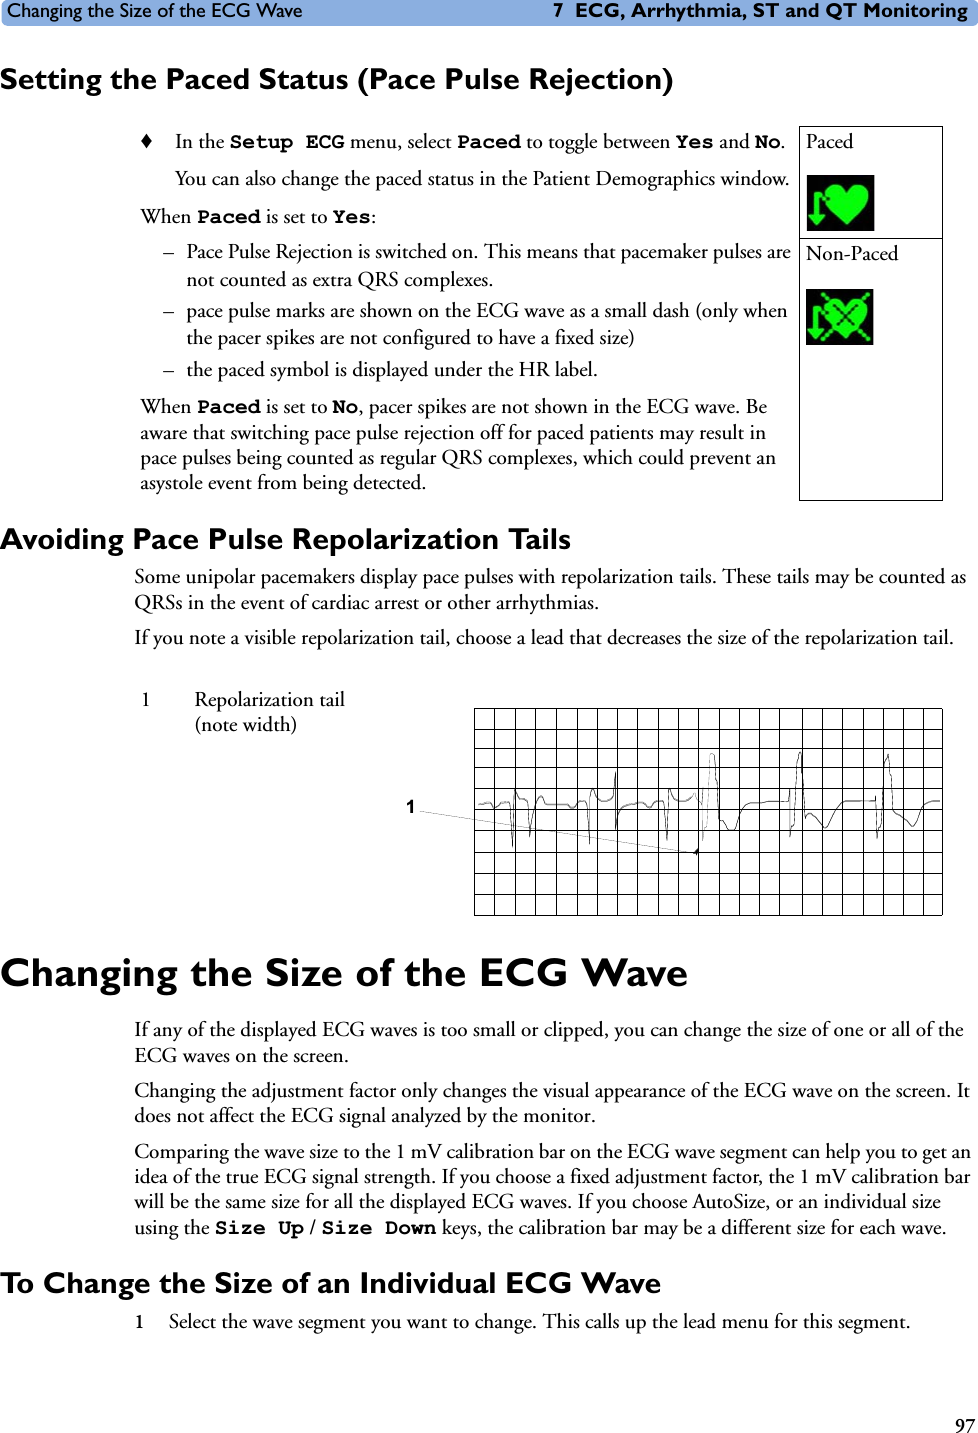 Changing the Size of the ECG Wave 7 ECG, Arrhythmia, ST and QT Monitoring97Setting the Paced Status (Pace Pulse Rejection)Avoiding Pace Pulse Repolarization TailsSome unipolar pacemakers display pace pulses with repolarization tails. These tails may be counted as QRSs in the event of cardiac arrest or other arrhythmias. If you note a visible repolarization tail, choose a lead that decreases the size of the repolarization tail.Changing the Size of the ECG WaveIf any of the displayed ECG waves is too small or clipped, you can change the size of one or all of the ECG waves on the screen.Changing the adjustment factor only changes the visual appearance of the ECG wave on the screen. It does not affect the ECG signal analyzed by the monitor.Comparing the wave size to the 1 mV calibration bar on the ECG wave segment can help you to get an idea of the true ECG signal strength. If you choose a fixed adjustment factor, the 1 mV calibration bar will be the same size for all the displayed ECG waves. If you choose AutoSize, or an individual size using the Size Up / Size Down keys, the calibration bar may be a different size for each wave. To Change the Size of an Individual ECG Wave1Select the wave segment you want to change. This calls up the lead menu for this segment.♦In the Setup ECG menu, select Paced to toggle between Yes and No. You can also change the paced status in the Patient Demographics window. When Paced is set to Yes: – Pace Pulse Rejection is switched on. This means that pacemaker pulses are not counted as extra QRS complexes. – pace pulse marks are shown on the ECG wave as a small dash (only when the pacer spikes are not configured to have a fixed size)– the paced symbol is displayed under the HR label.When Paced is set to No, pacer spikes are not shown in the ECG wave. Be aware that switching pace pulse rejection off for paced patients may result in pace pulses being counted as regular QRS complexes, which could prevent an asystole event from being detected.PacedNon-Paced1 Repolarization tail (note width)1